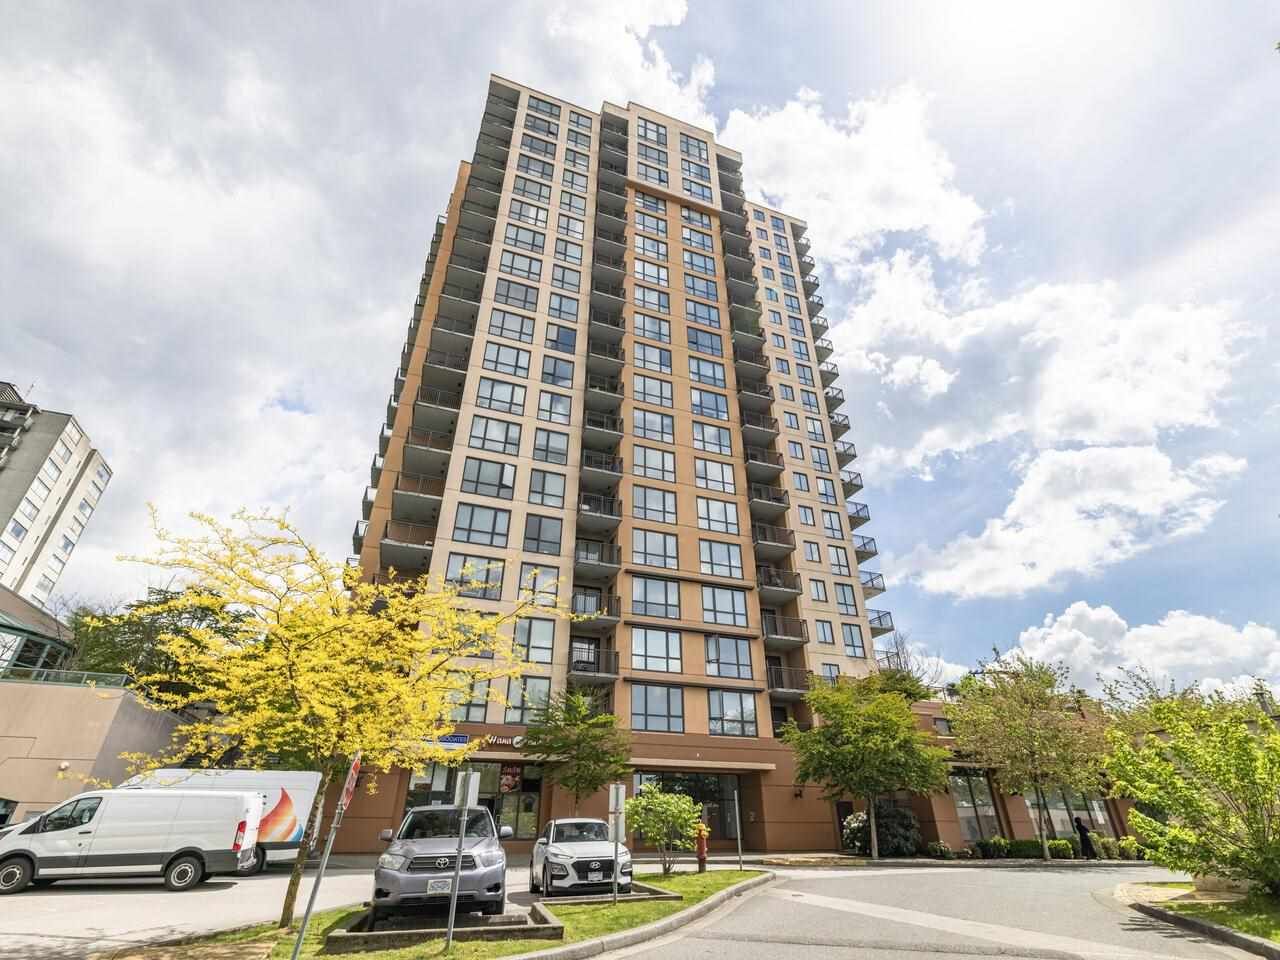 Main Photo: 506 511 ROCHESTER AVENUE in : Coquitlam West Condo for sale : MLS®# R2579831